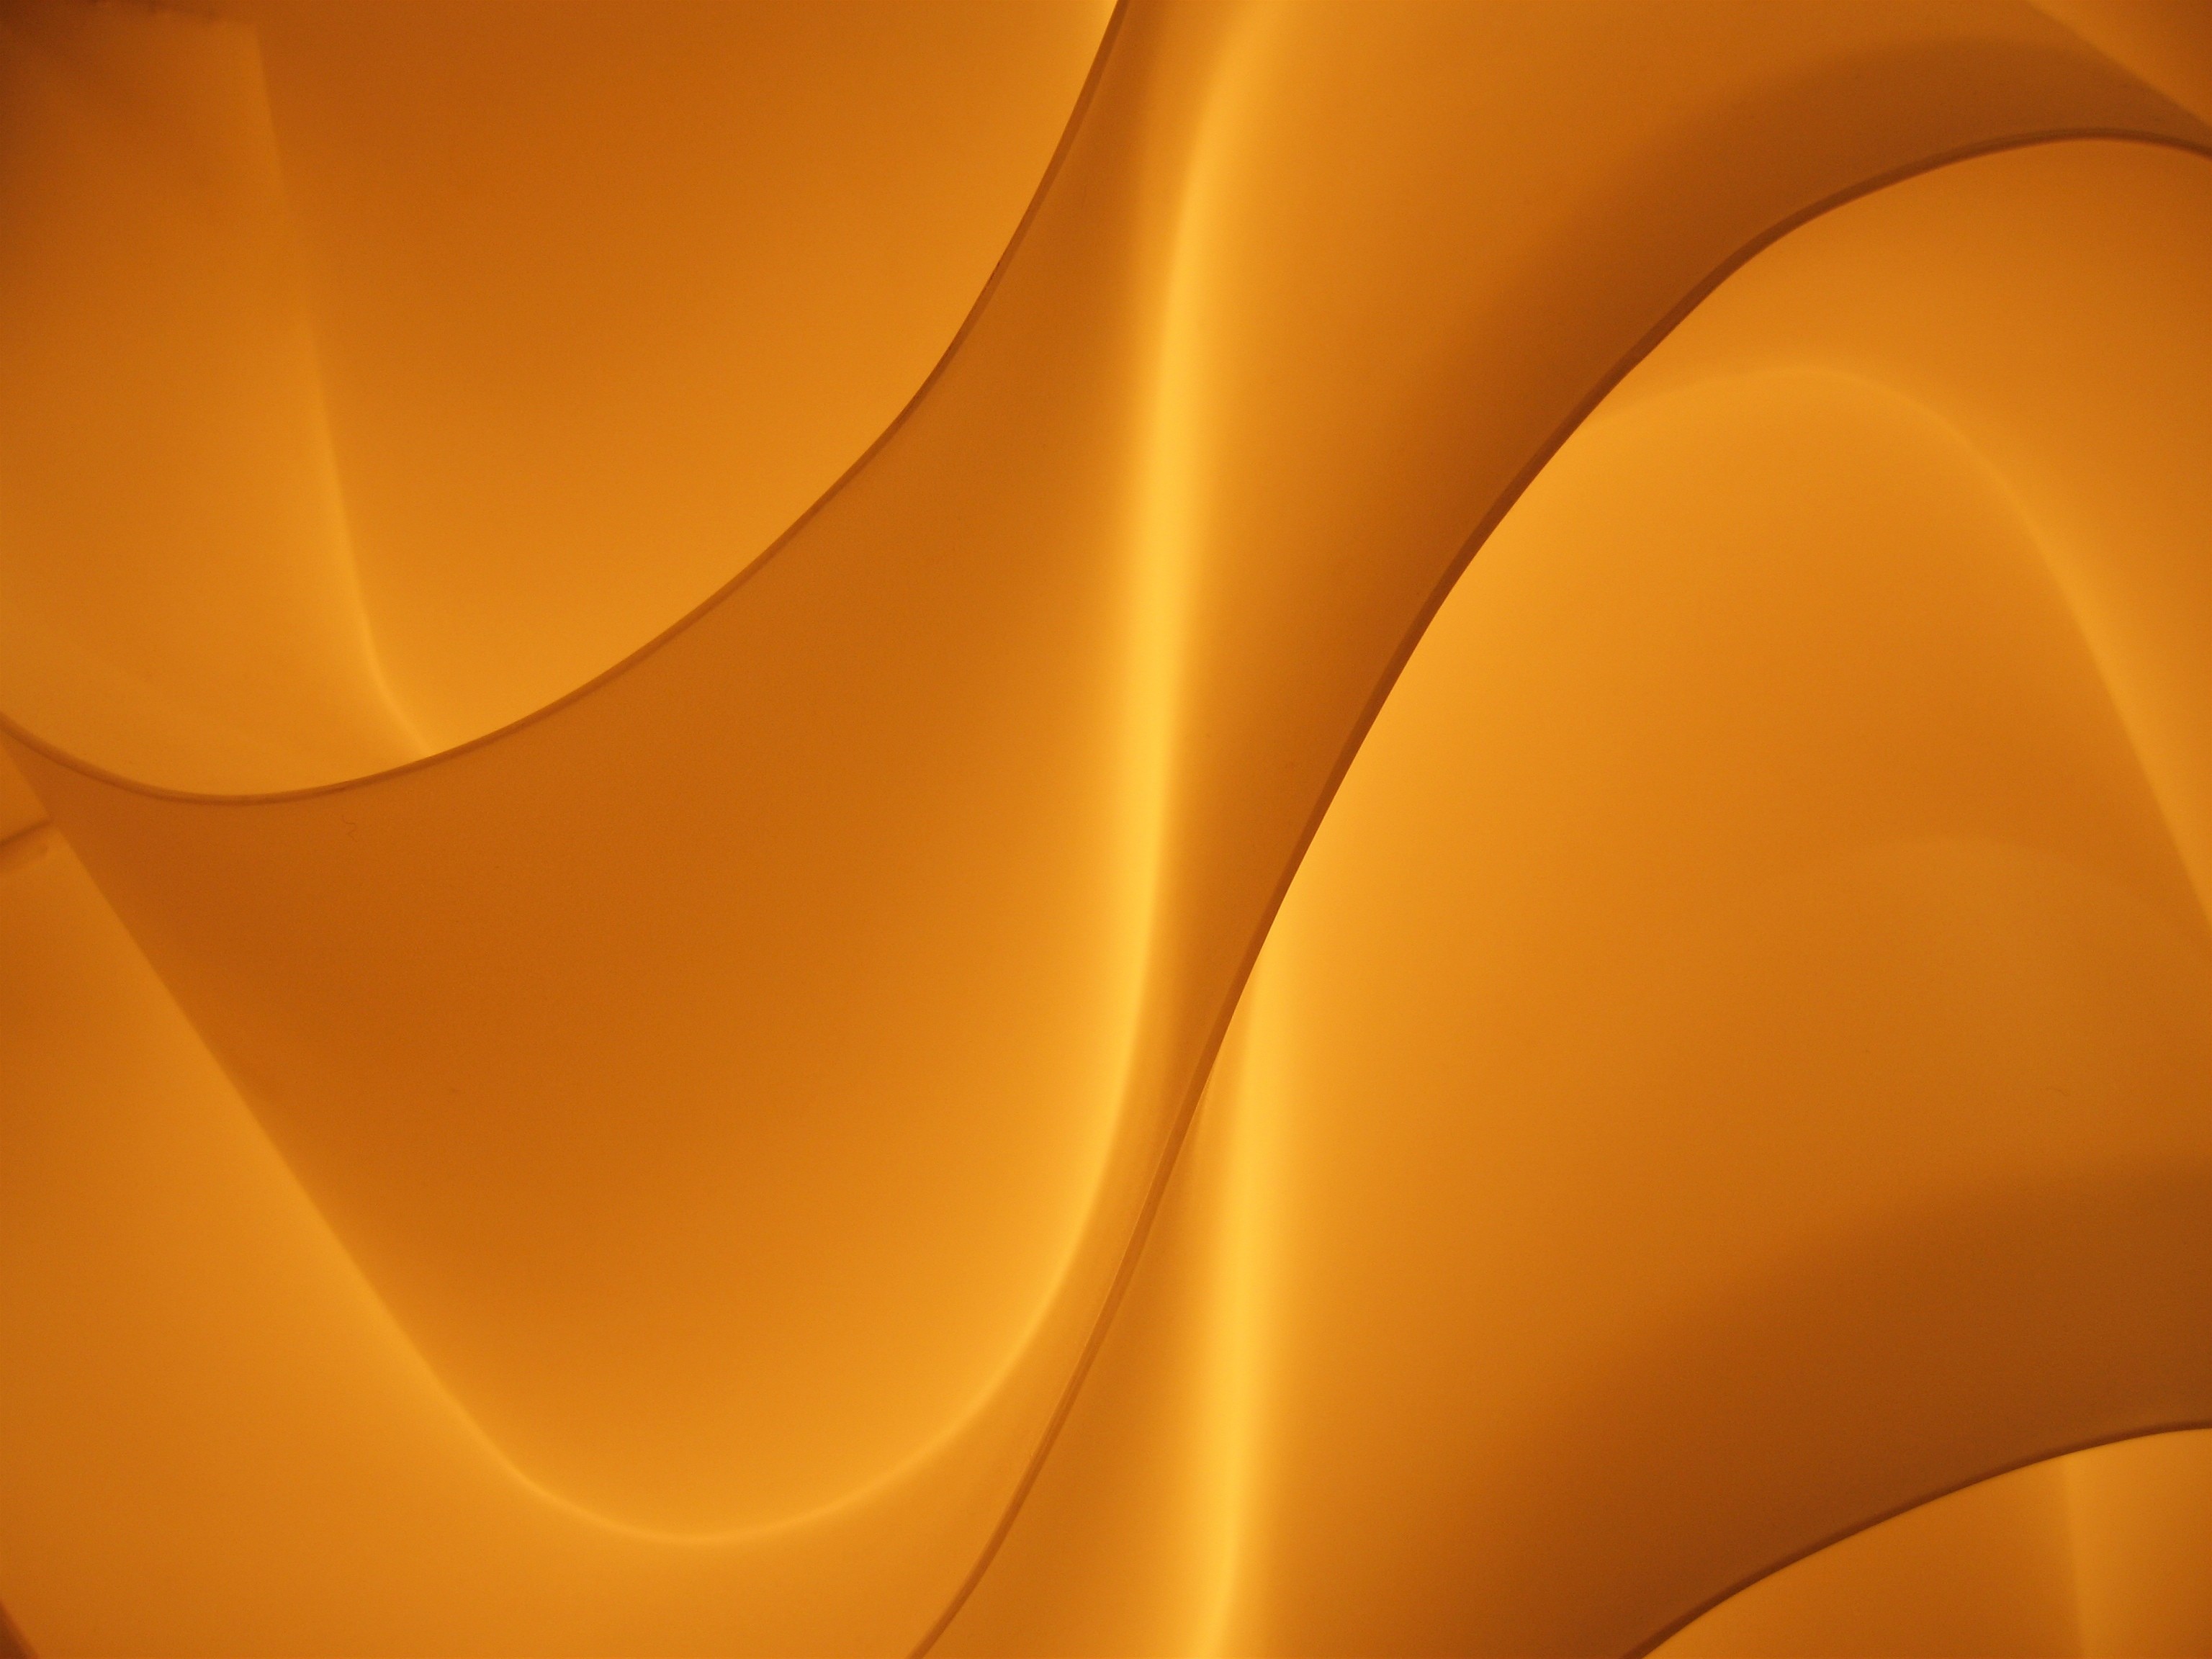 General 3072x2304 abstract shapes texture orange background